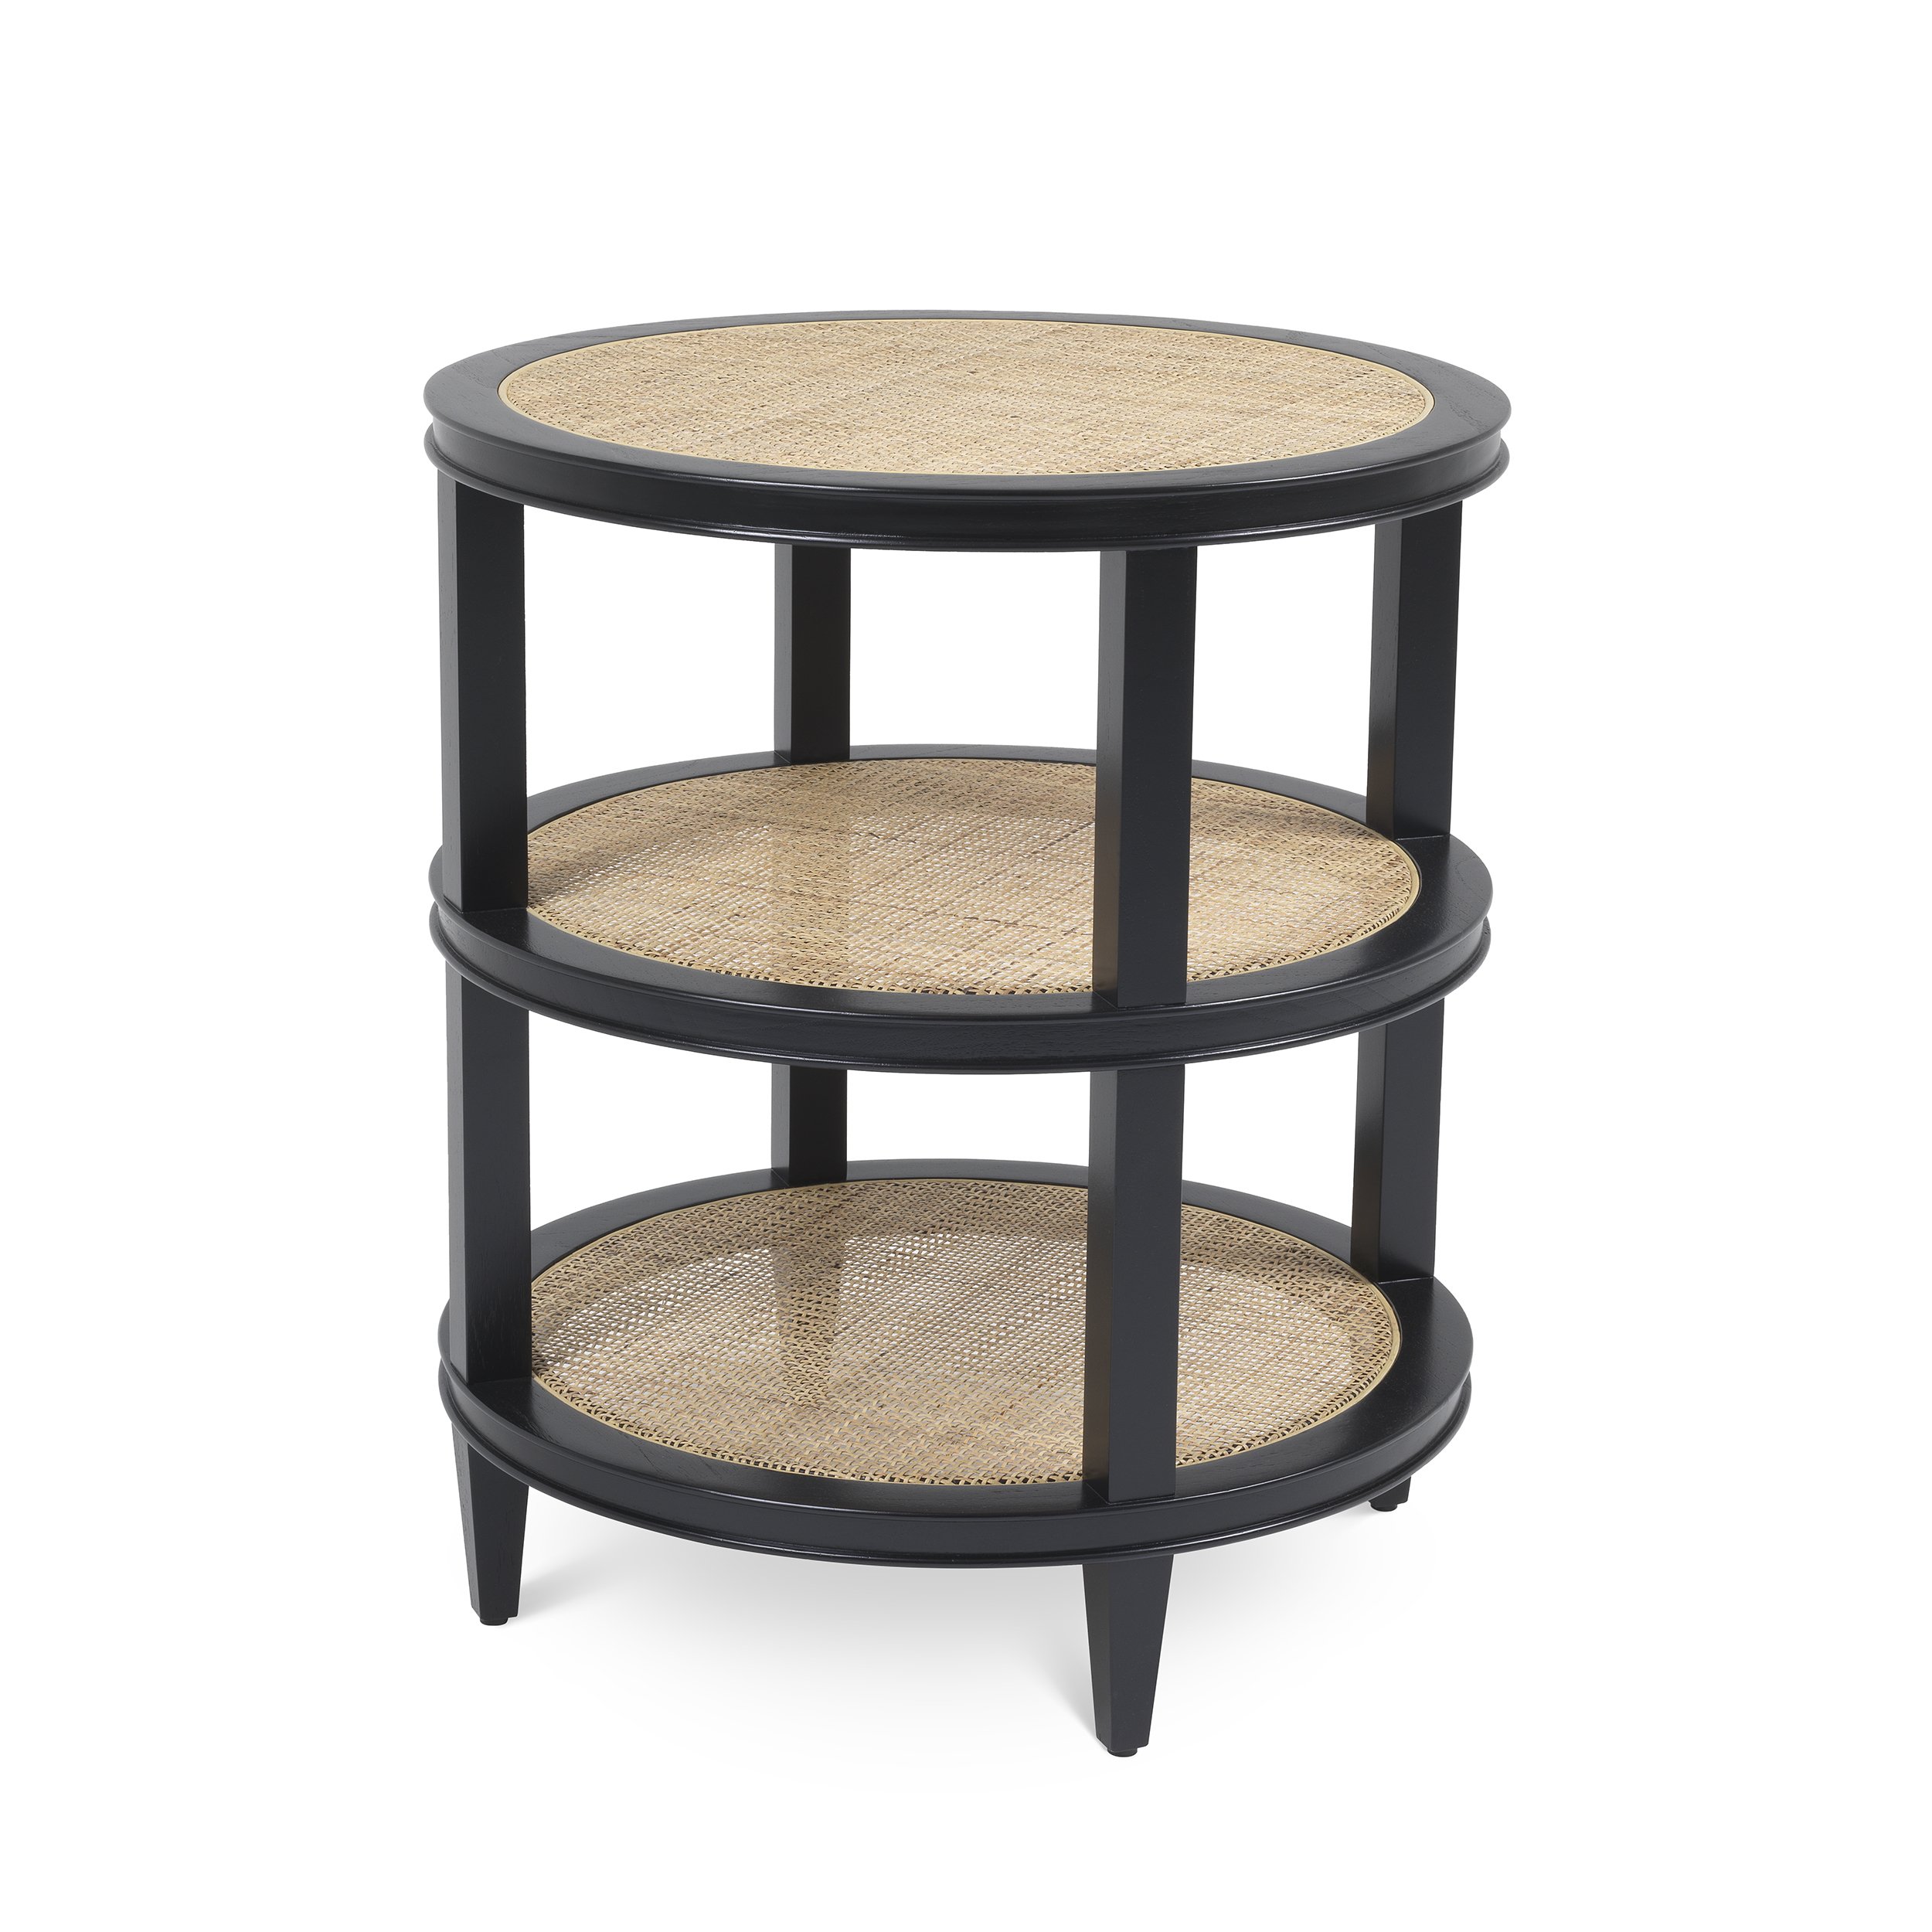 Eichholtz Cocoa Side Table €928.17, 